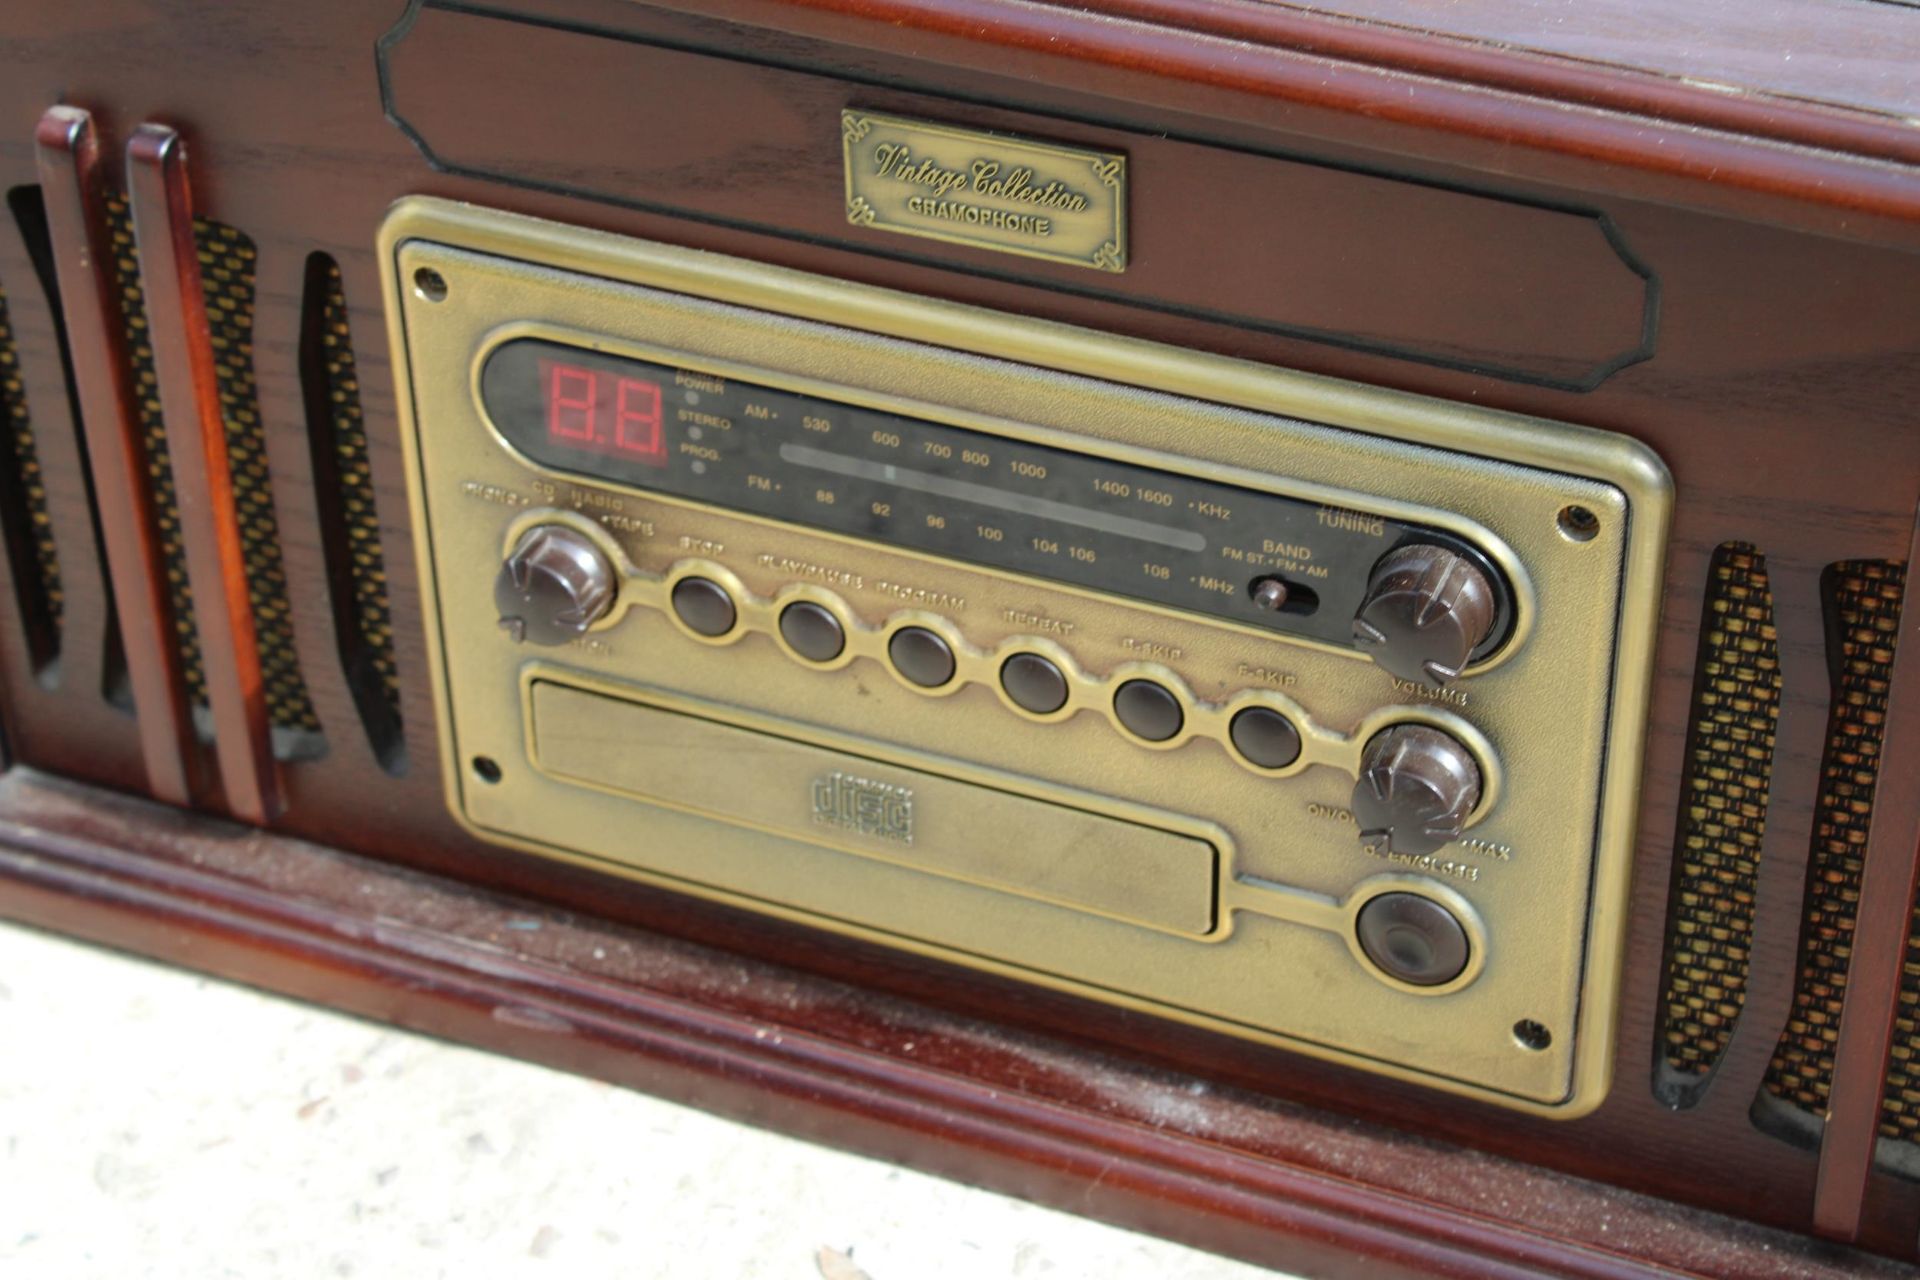 A RETRO STYLE RECORD PLAYER - Image 2 of 3